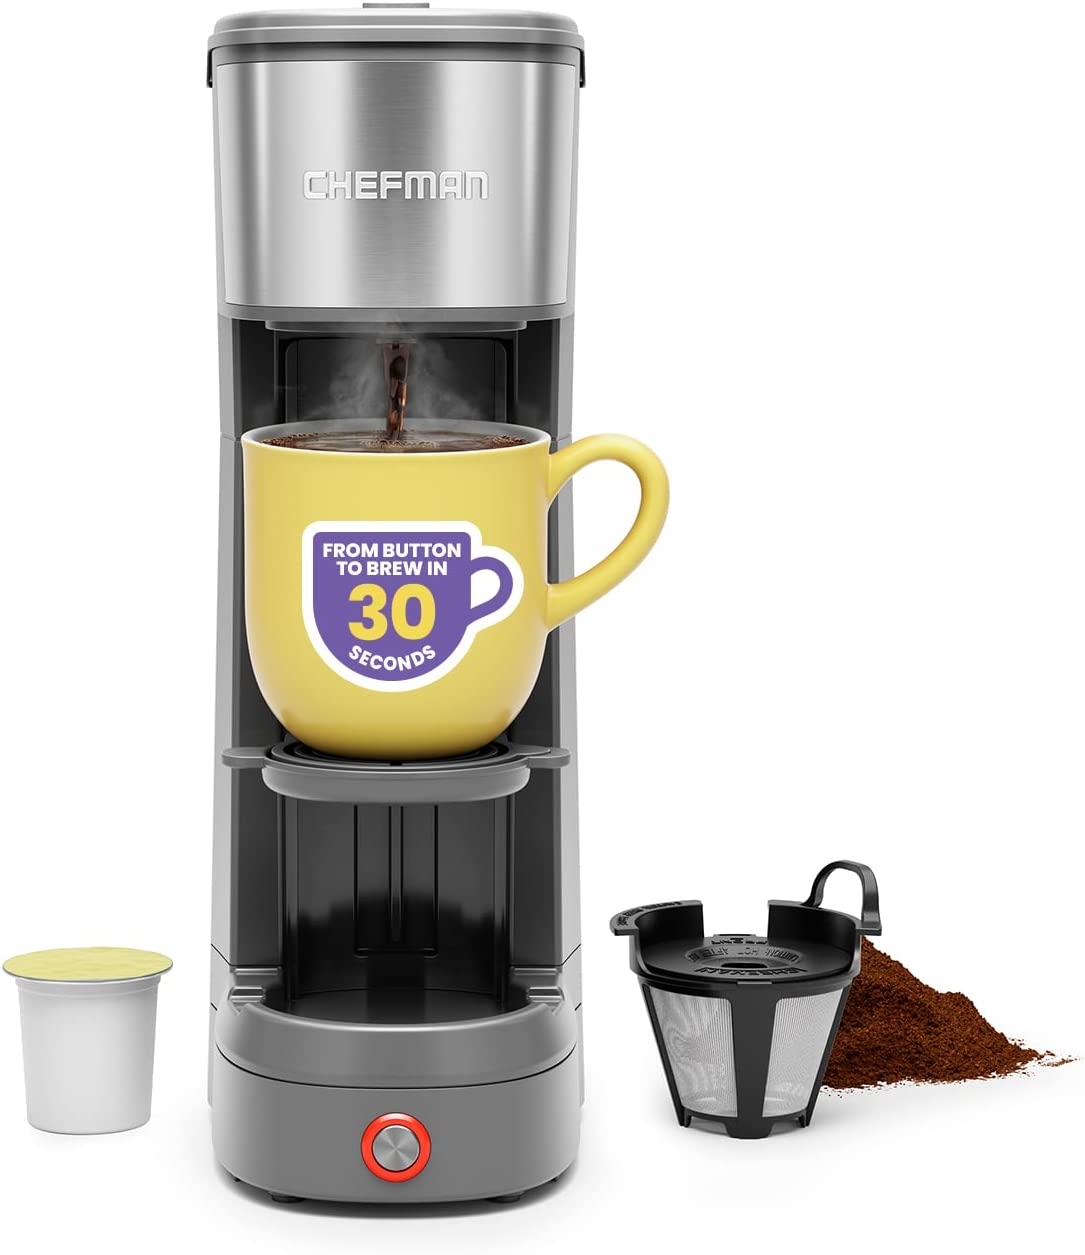 Chefman InstaCoffee Max, The Easiest Way to Brew the Boldest Single-Serve Coffee, Use Fresh And Flavorful Grounds or K-Cups With